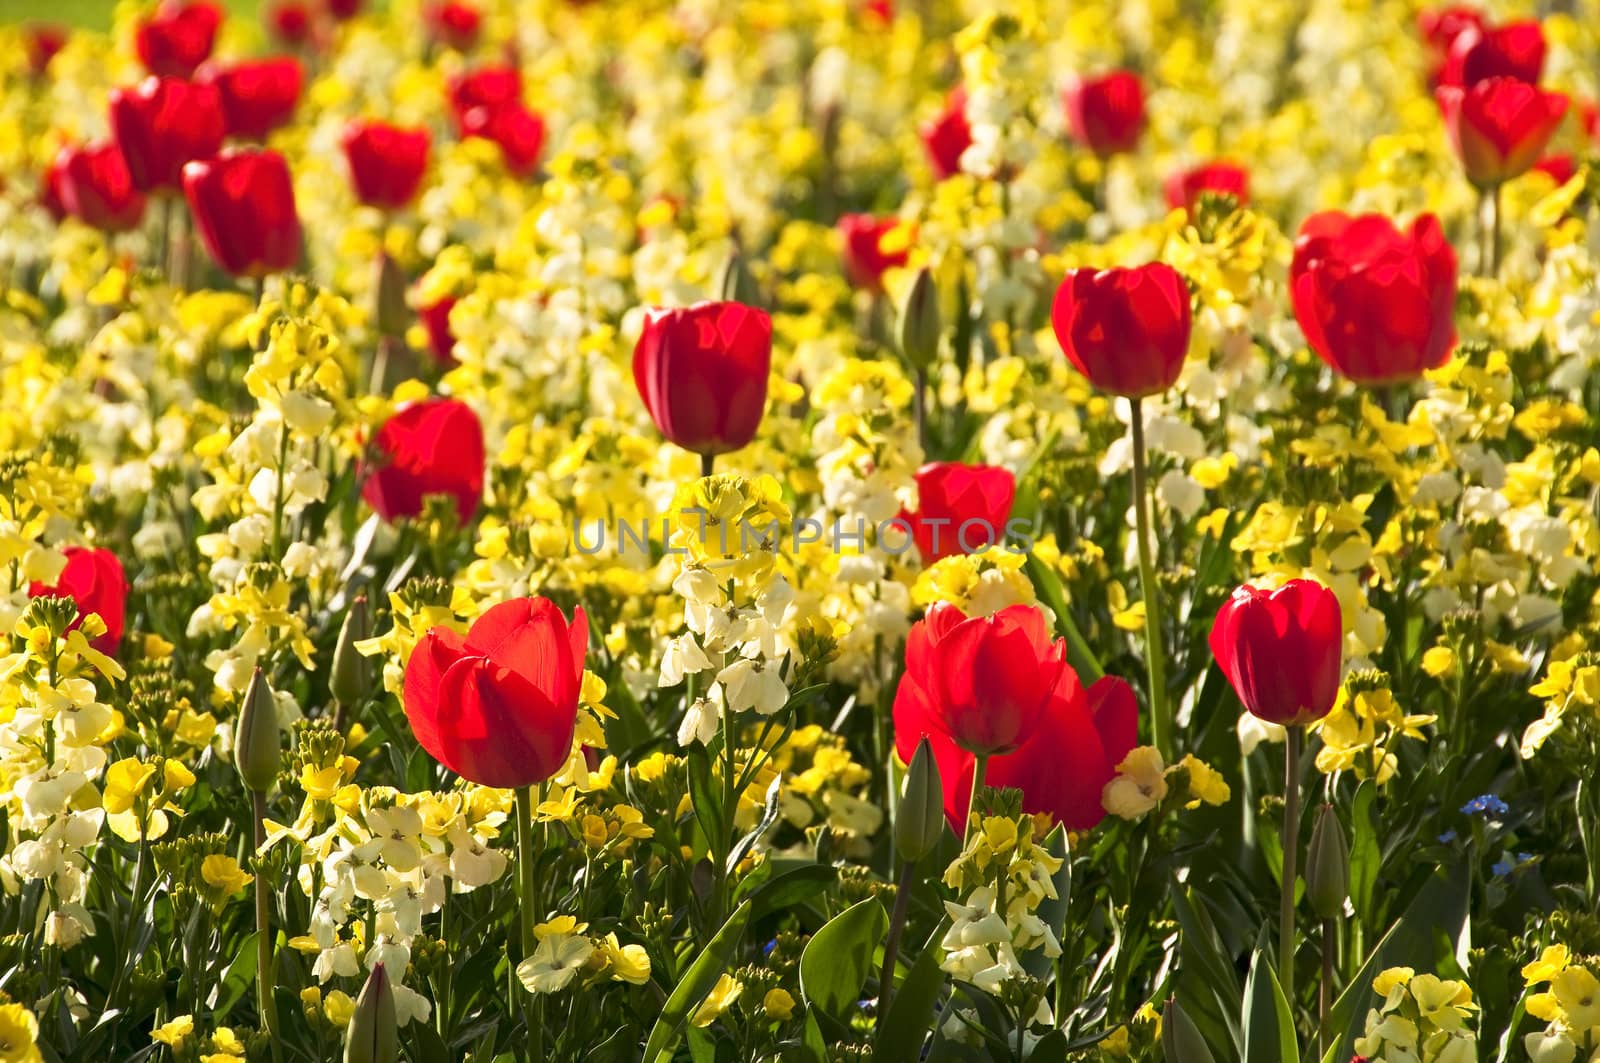 Red tulips and yellow flowers in spring